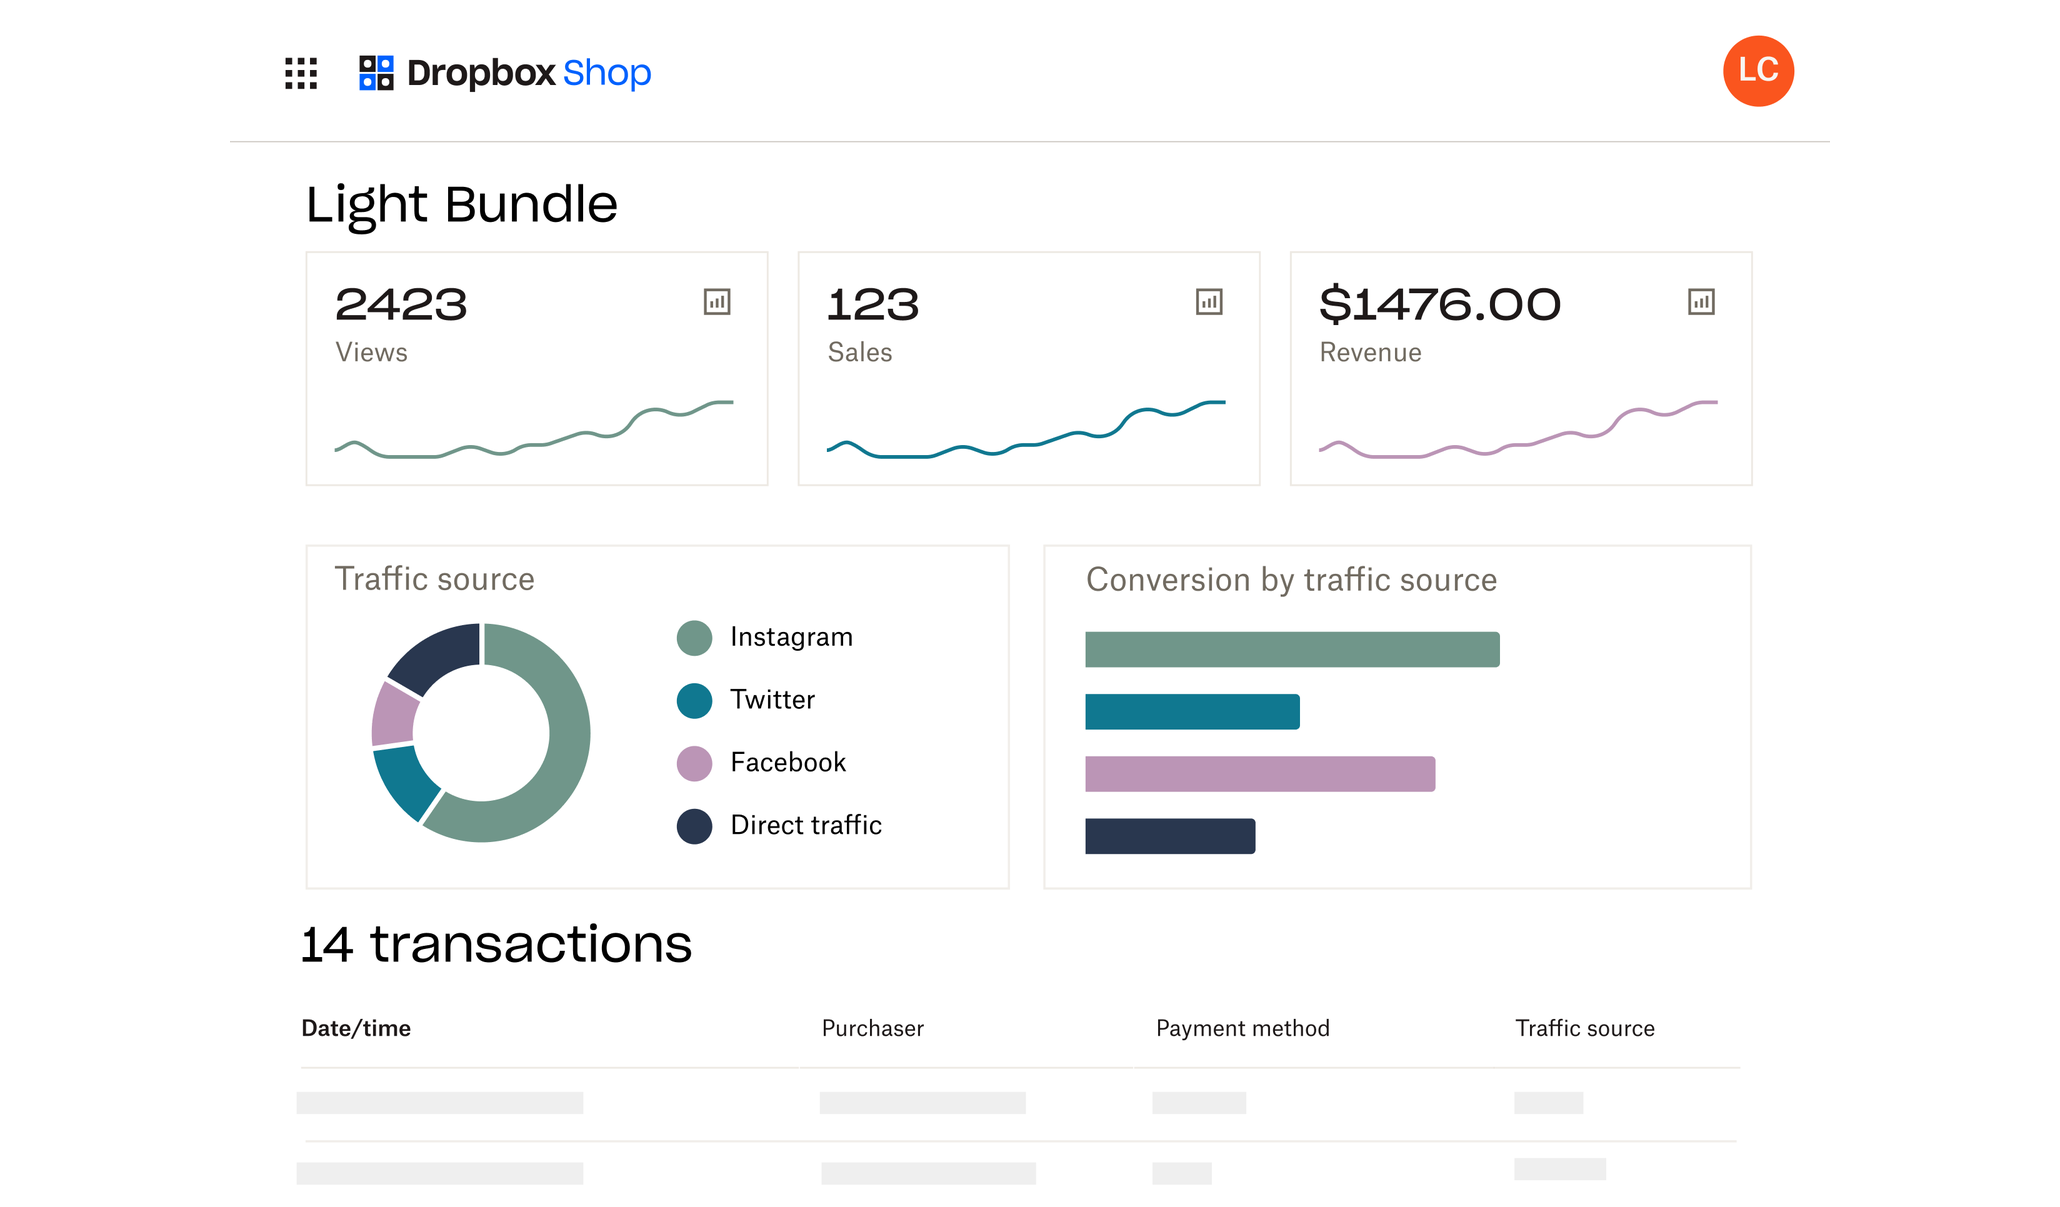 The analytics dashboard for a Dropbox Shop listing.